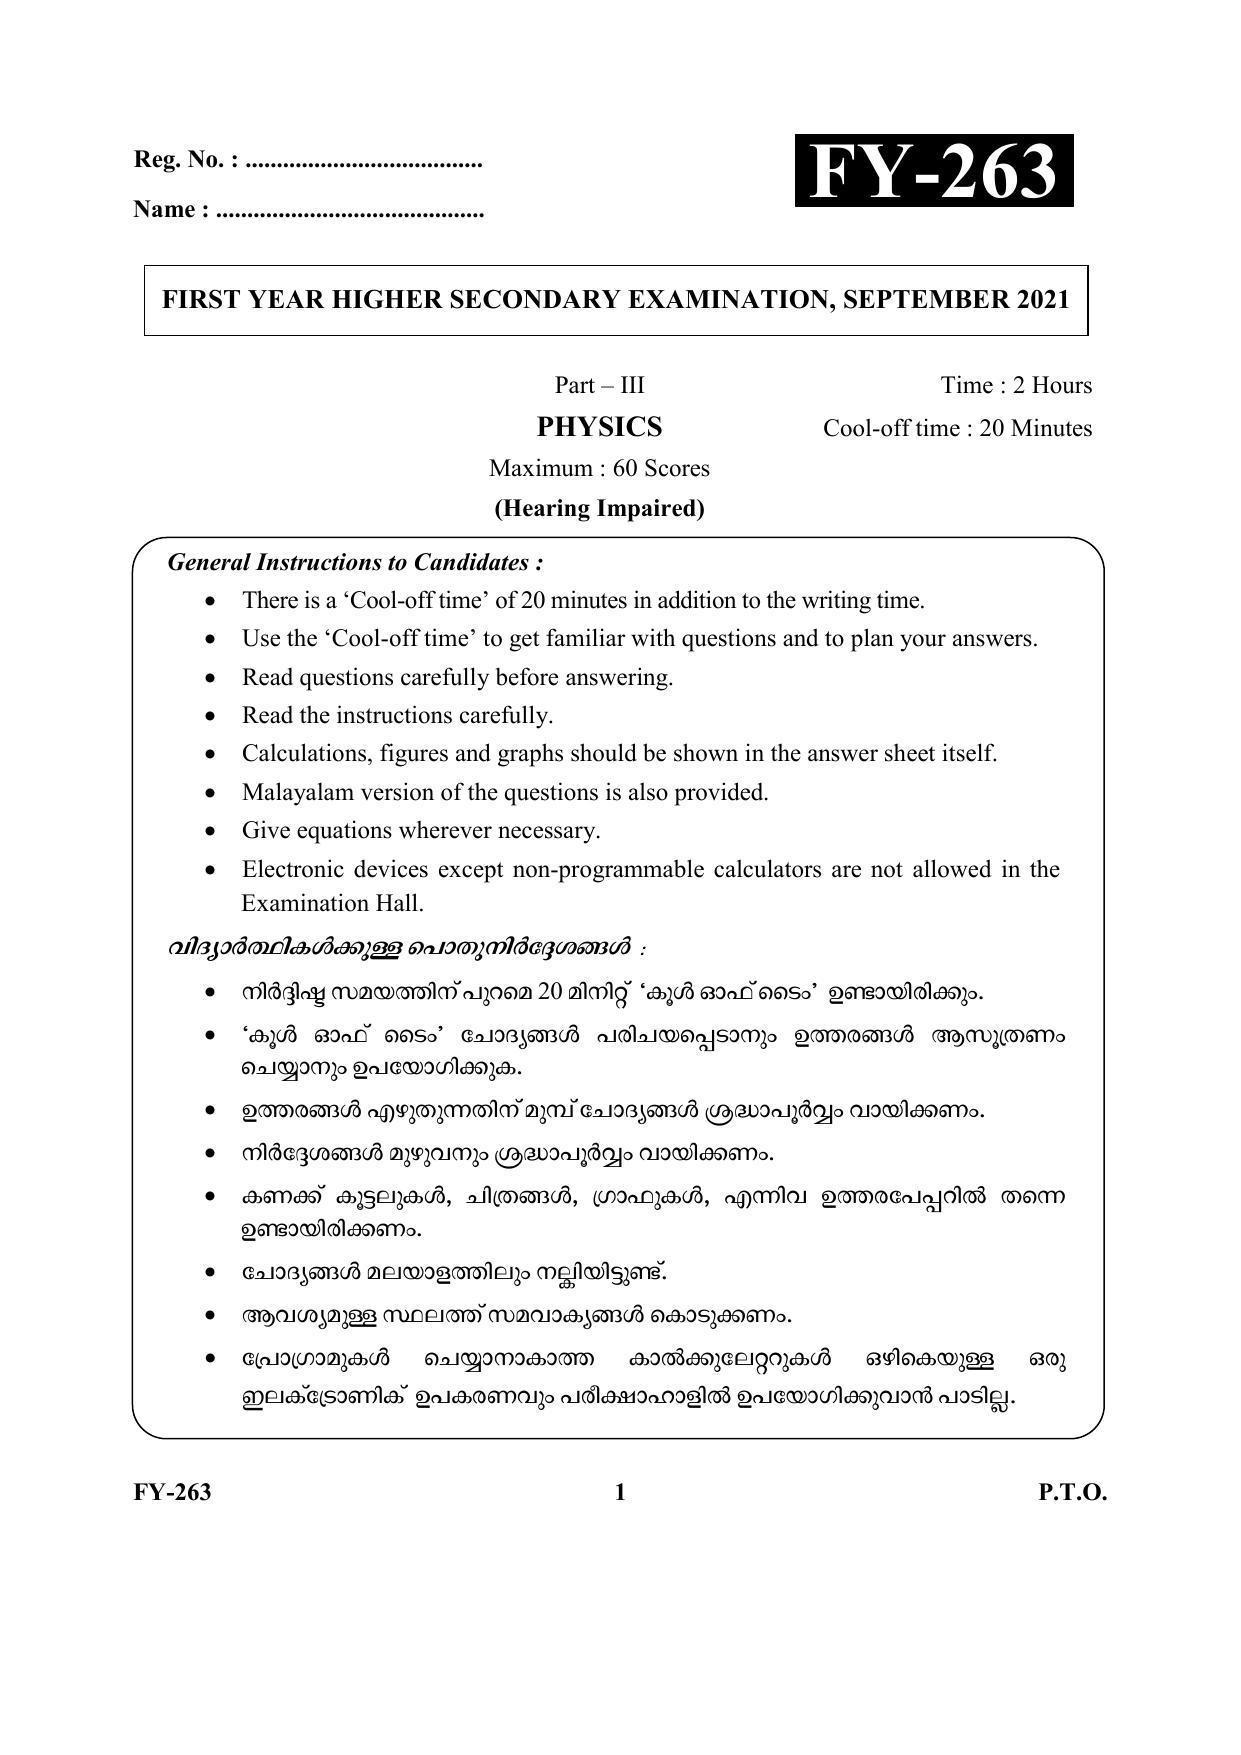 Kerala Plus One (Class 11th) Physics (Hearing Impaired) Question Paper 2021 - Page 1